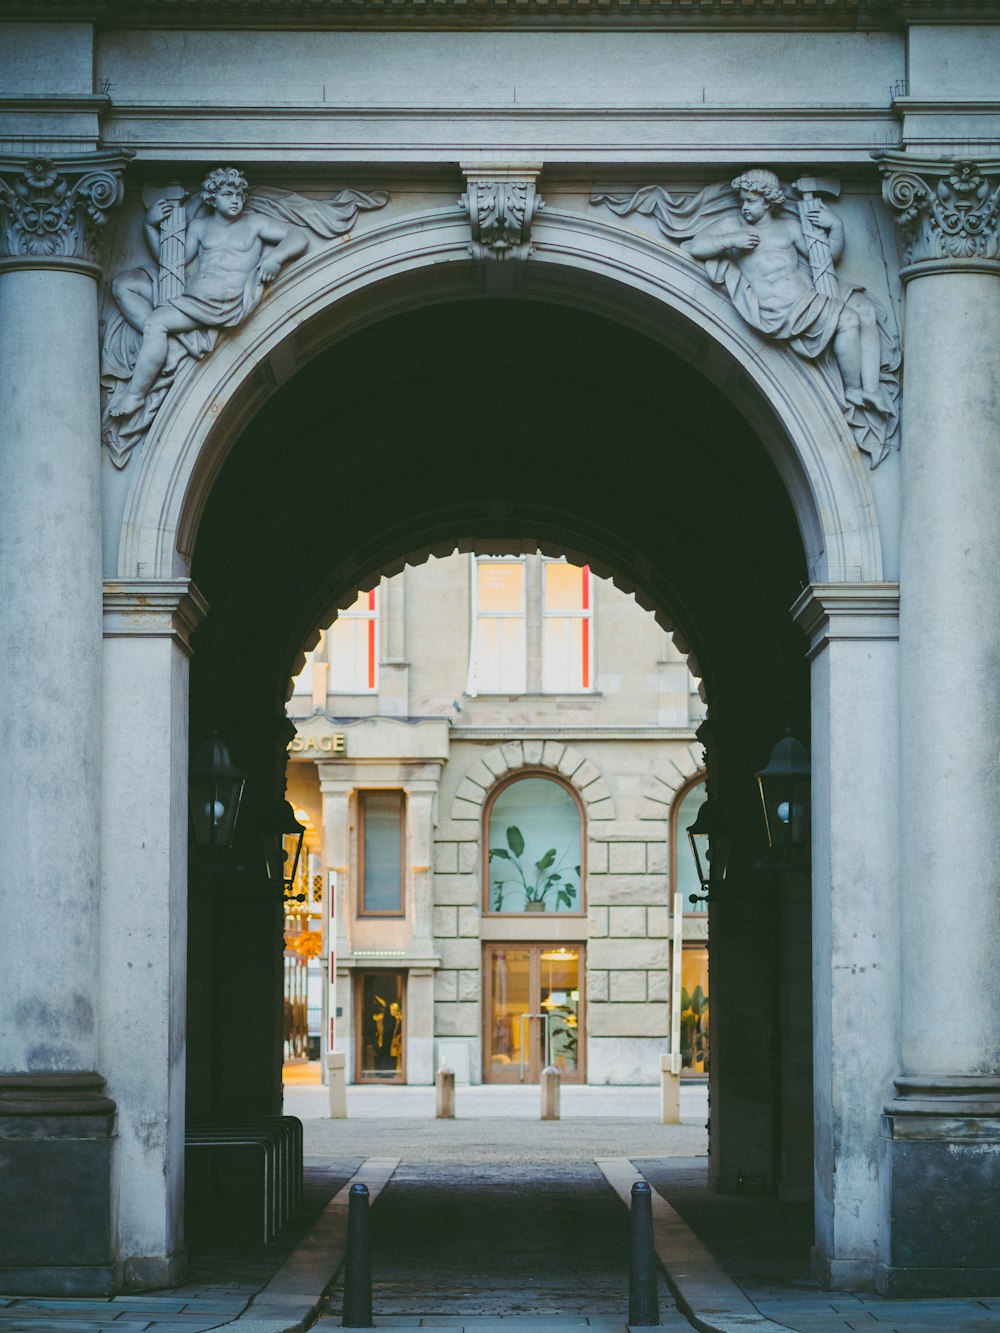 an archway leading into a building with a clock on it